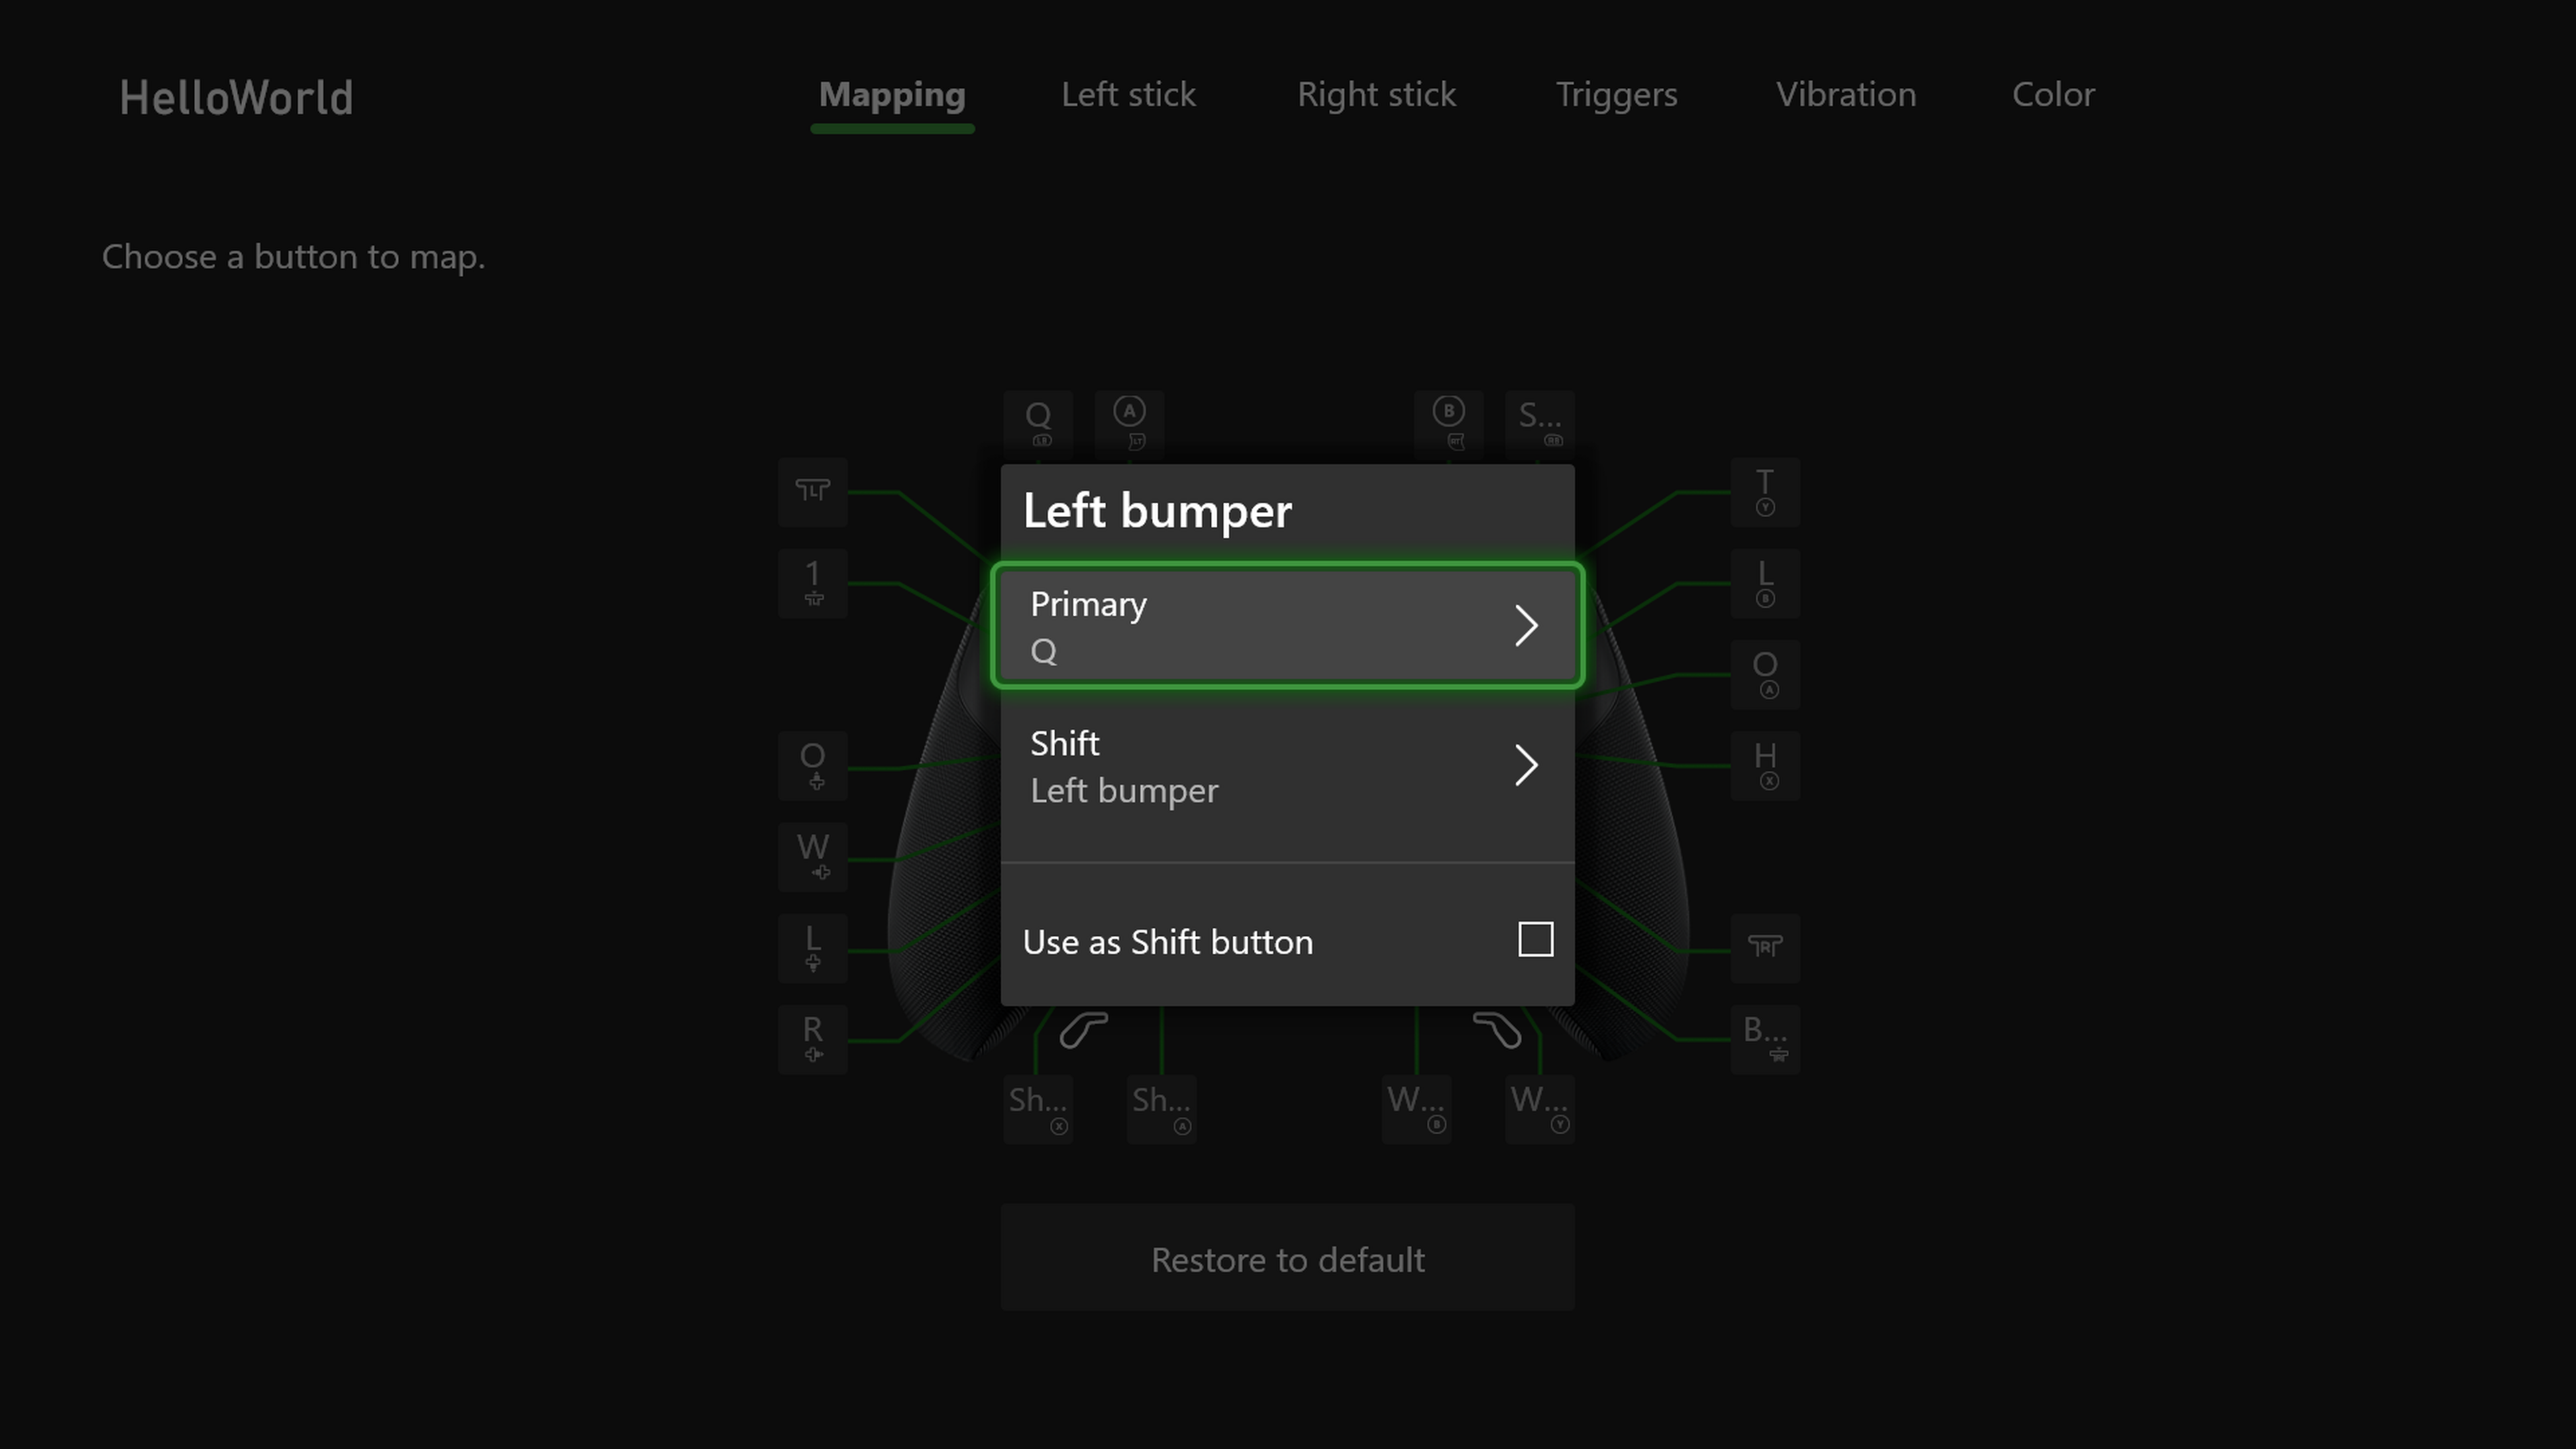 Xbox Will Soon Allow Players To Map Keyboard Shortcuts To Their Controller